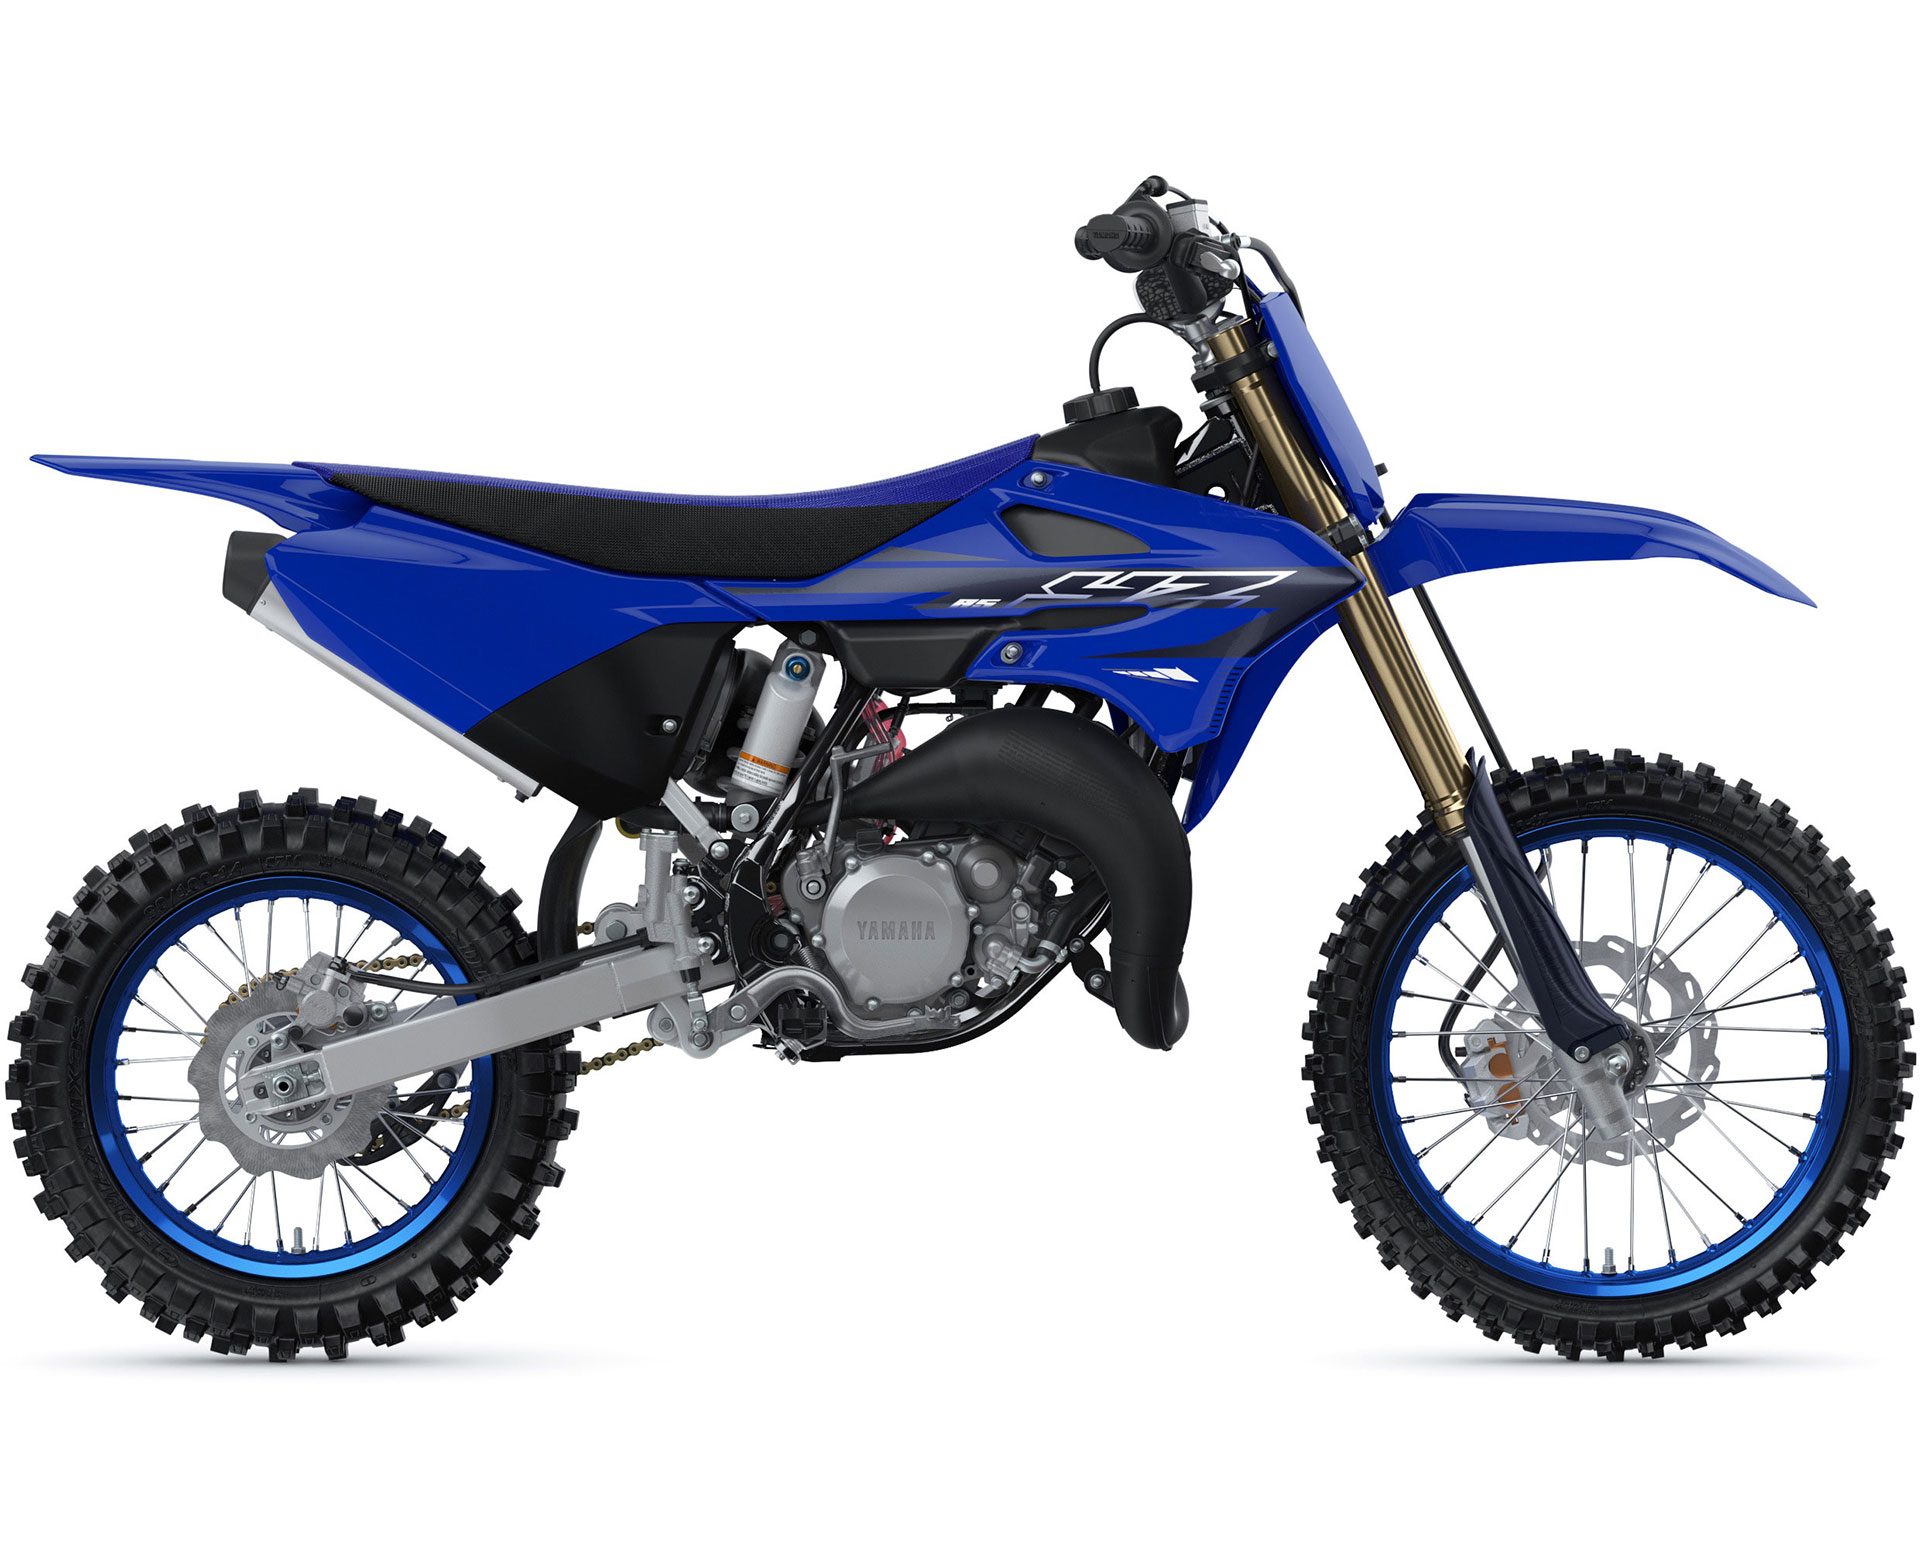 Thumbnail of your customized YZ85 2023